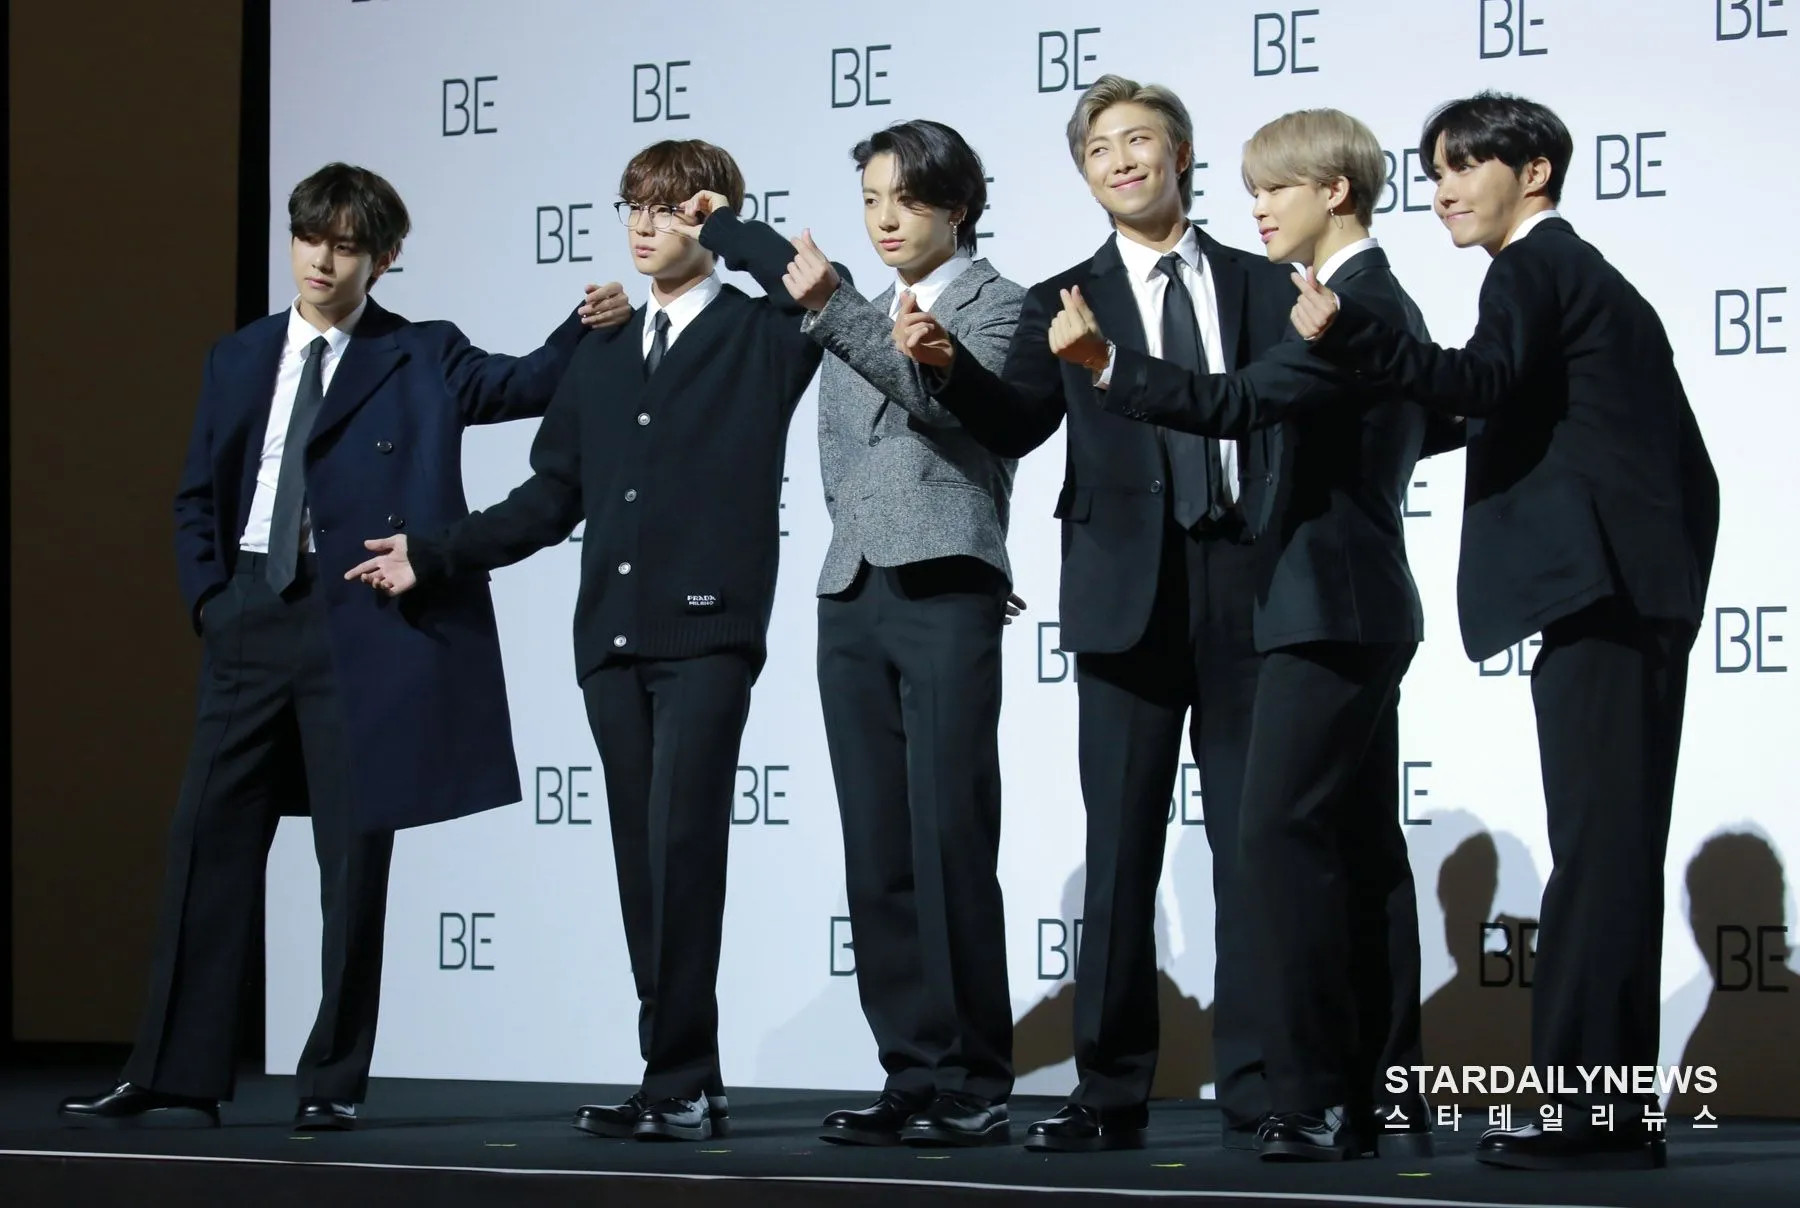 11 Bts Be Global Press Conference Kpopping